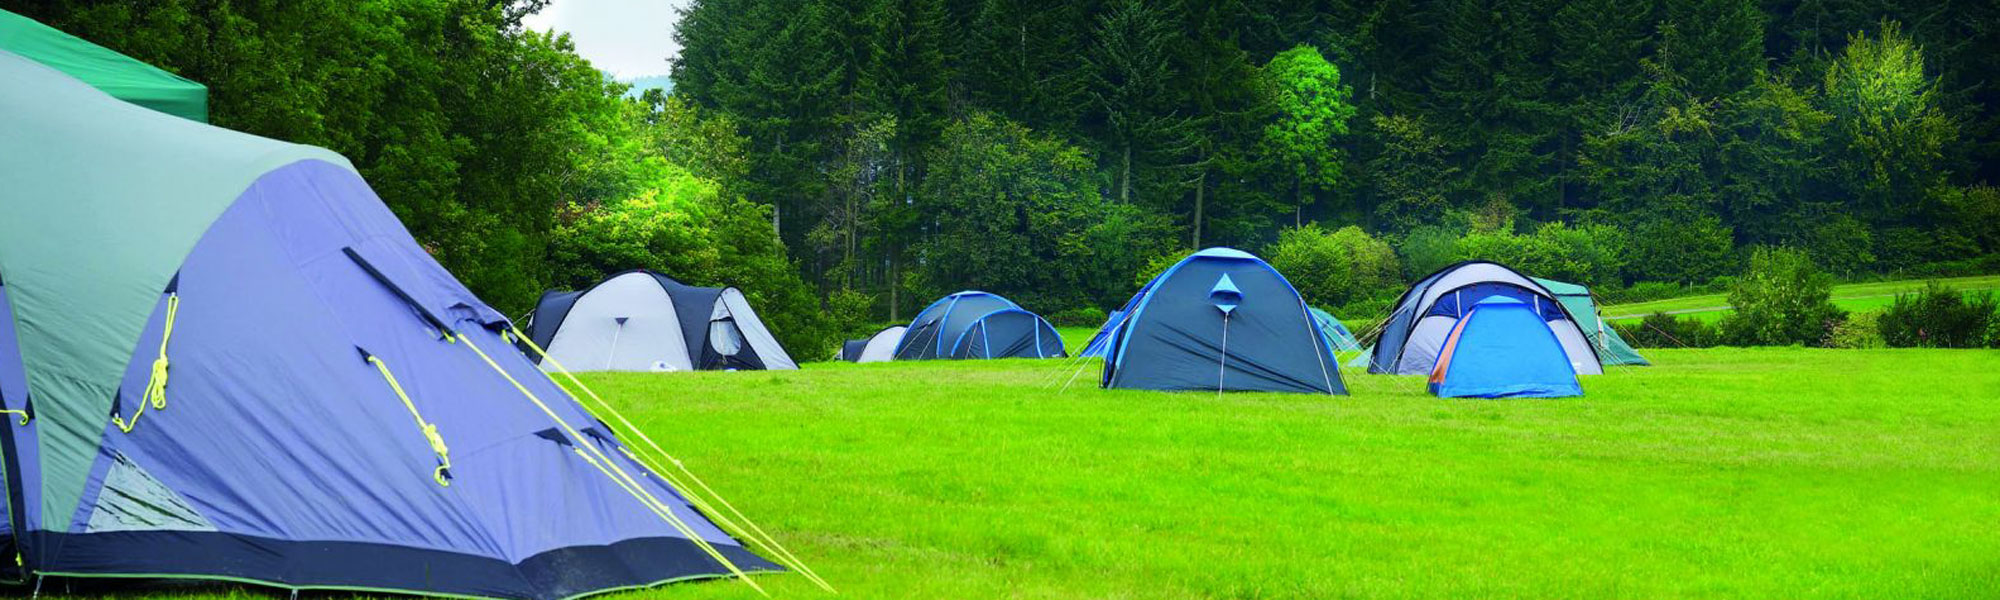 Camping, Glamping and Adventure Activities in Roscommon